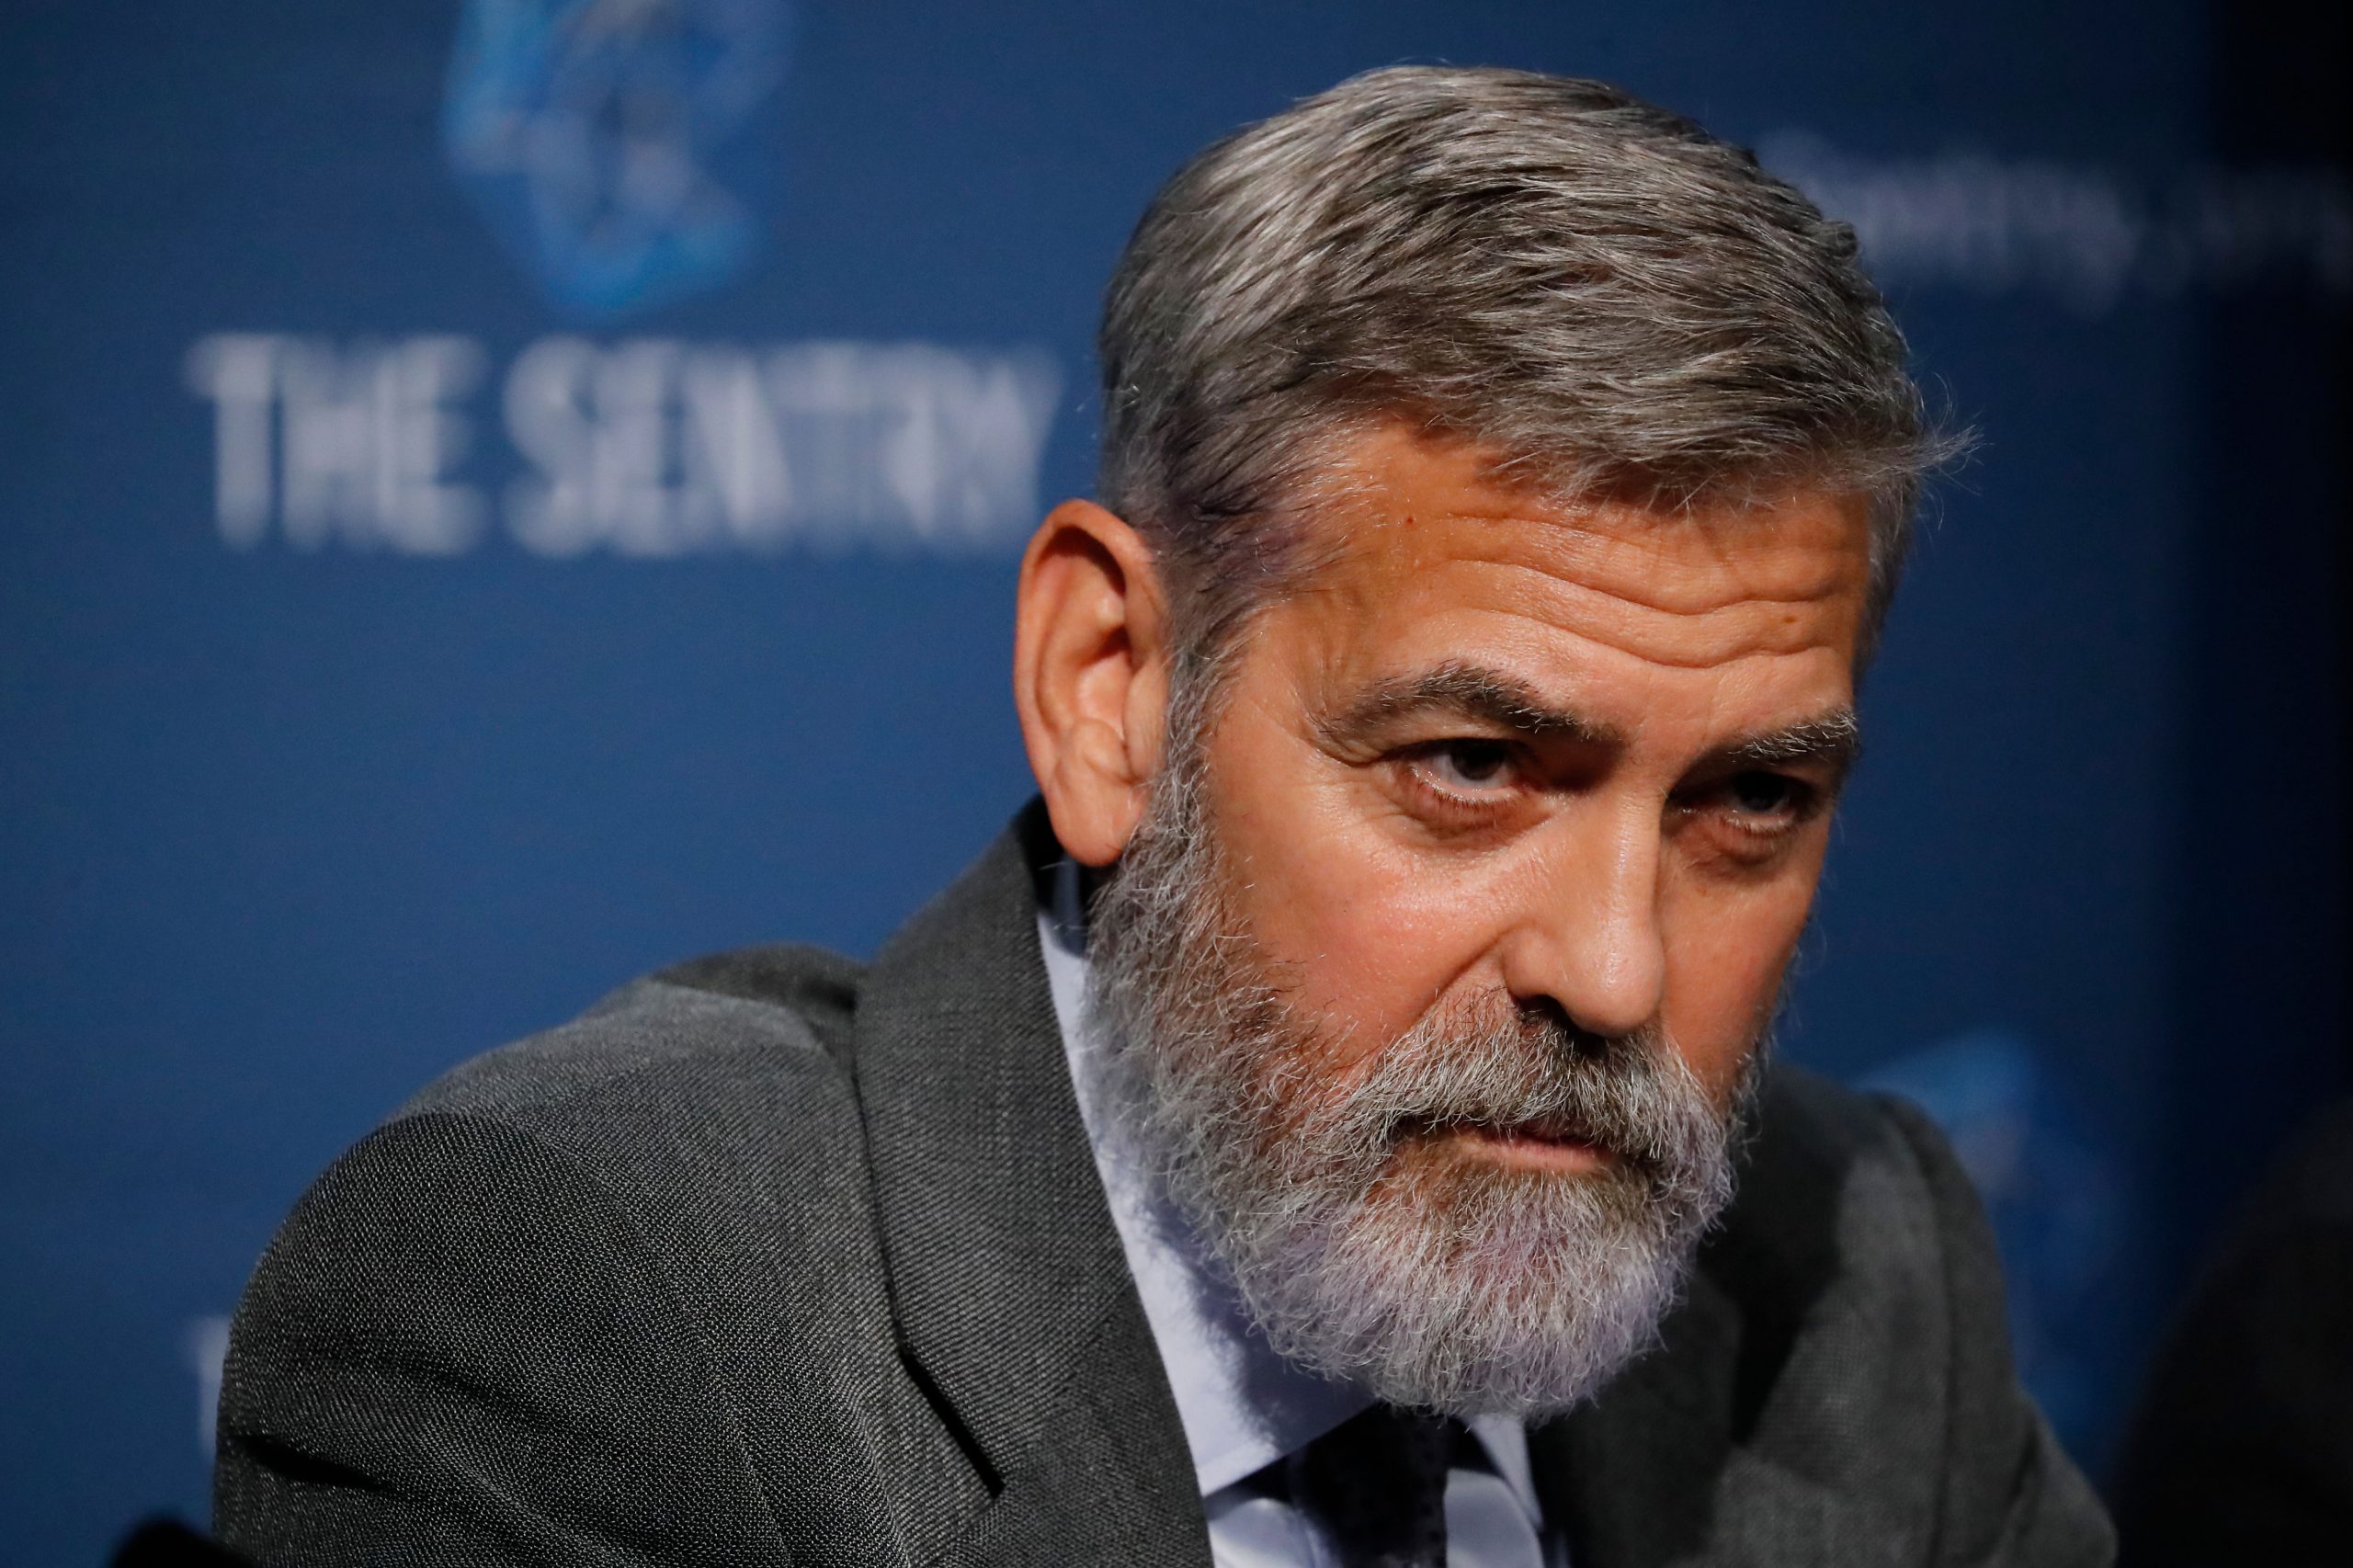 George Clooney, Grant Heslov collaborate for new project ‘Calico Joe’